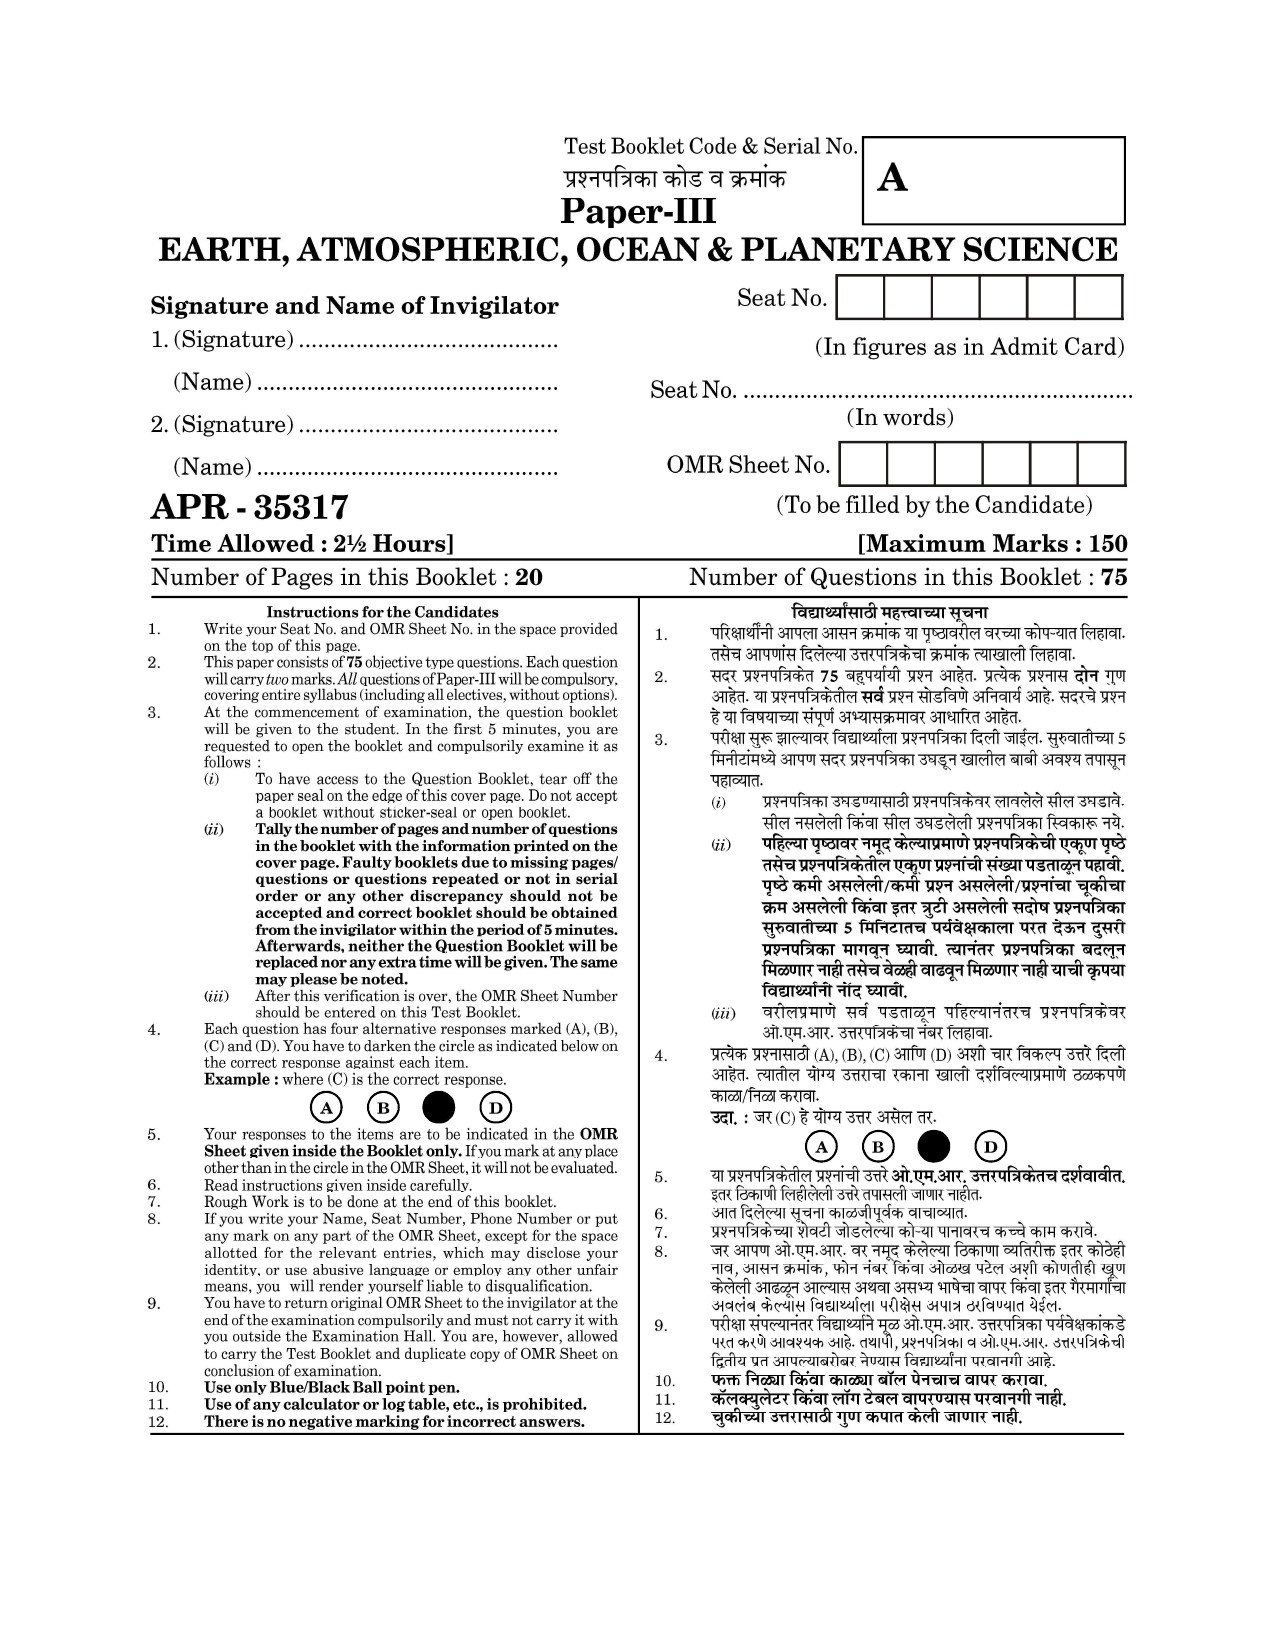 Maharashtra SET Earth Atmospheric Ocean Planetary Science Question Paper III April 2017 1